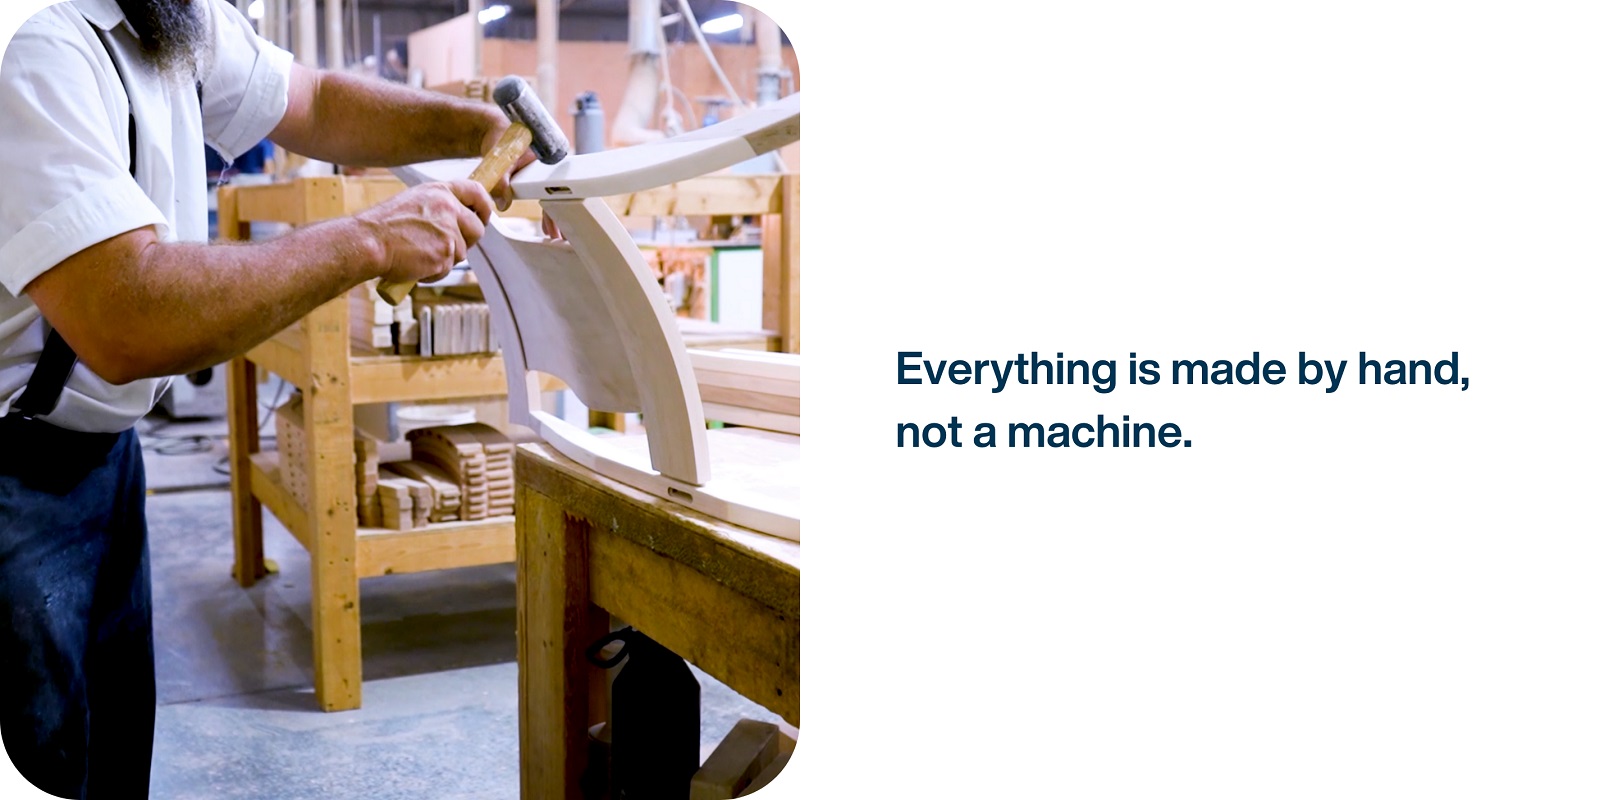 Everything is made by hand, not a machine.